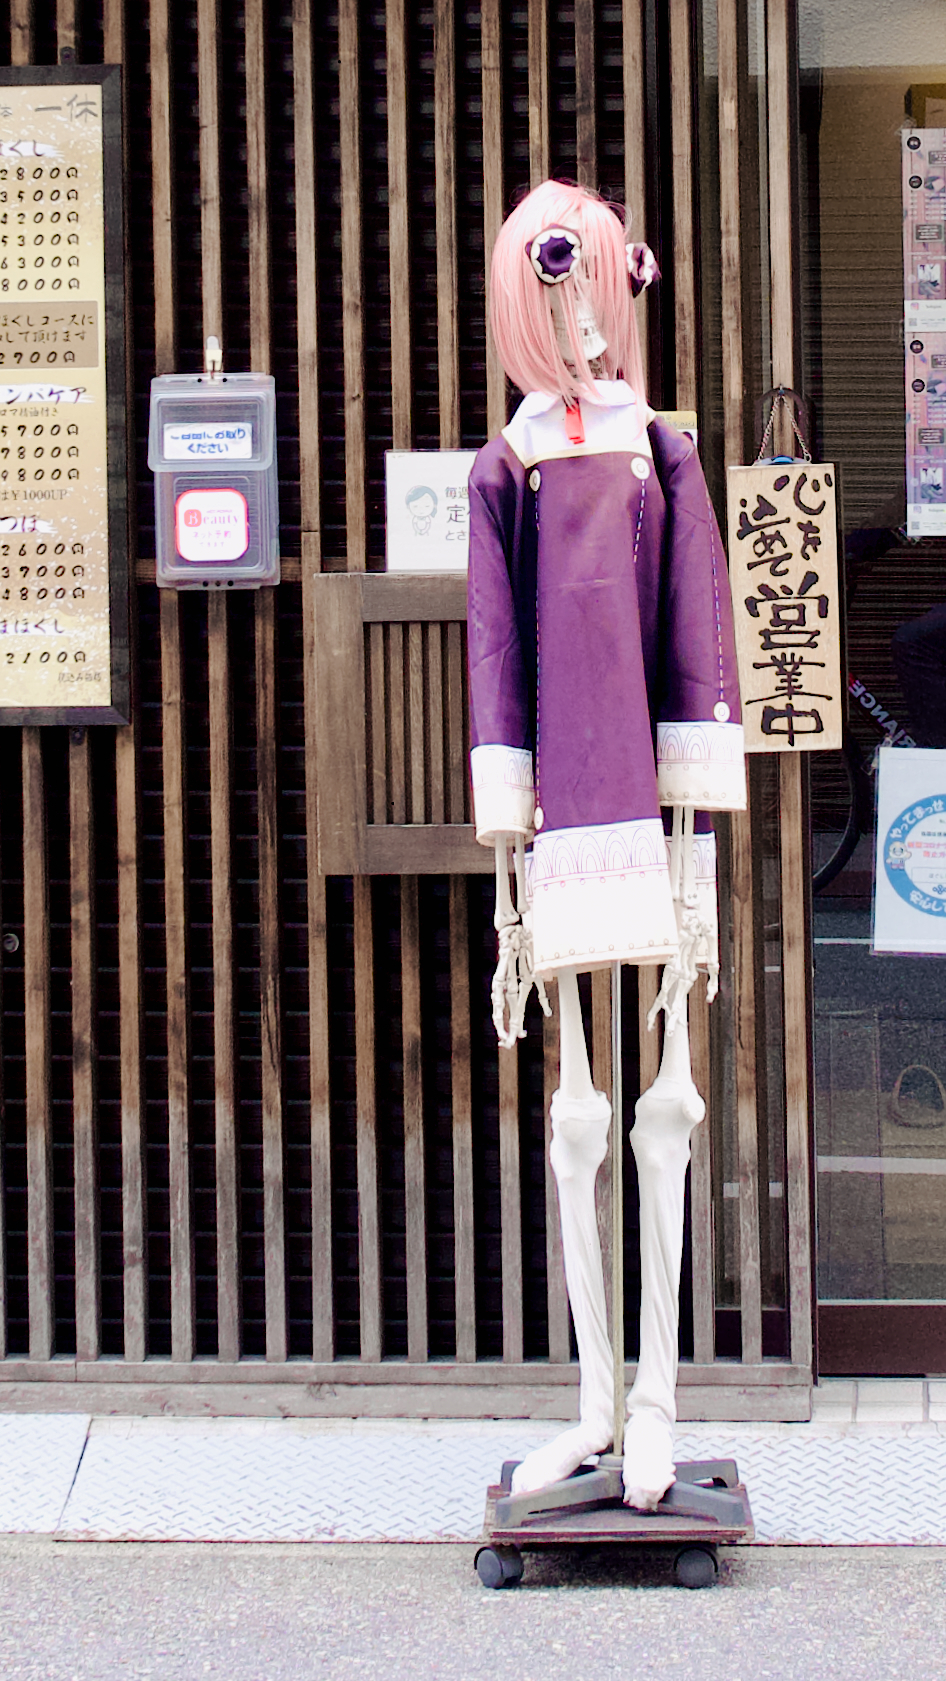 A life-sized medical human skeleton model stands in front of a shop cosplaying as Anya from Spy Family… ?